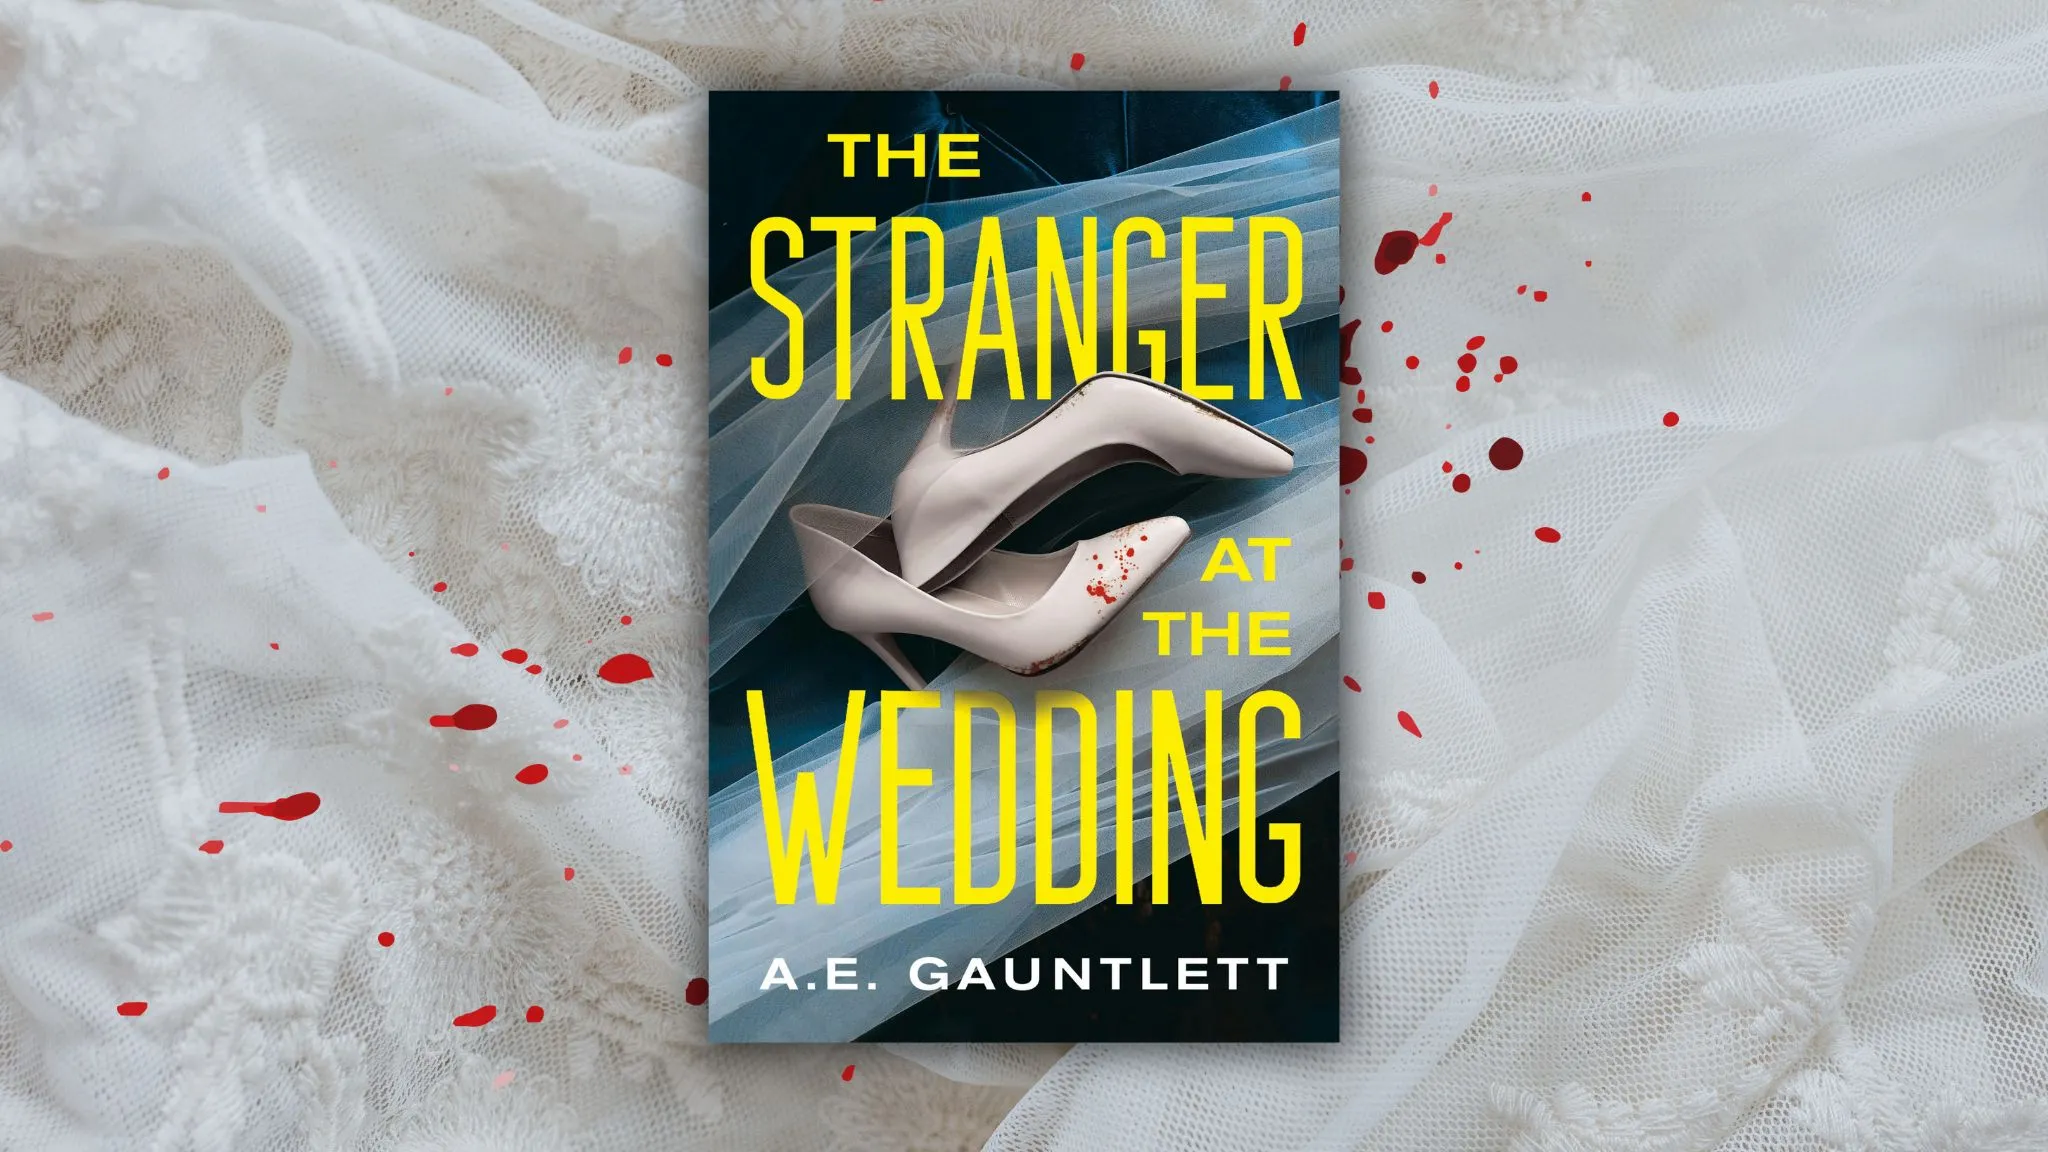 The Perfect Day – Until She Saw the Stranger at the Wedding